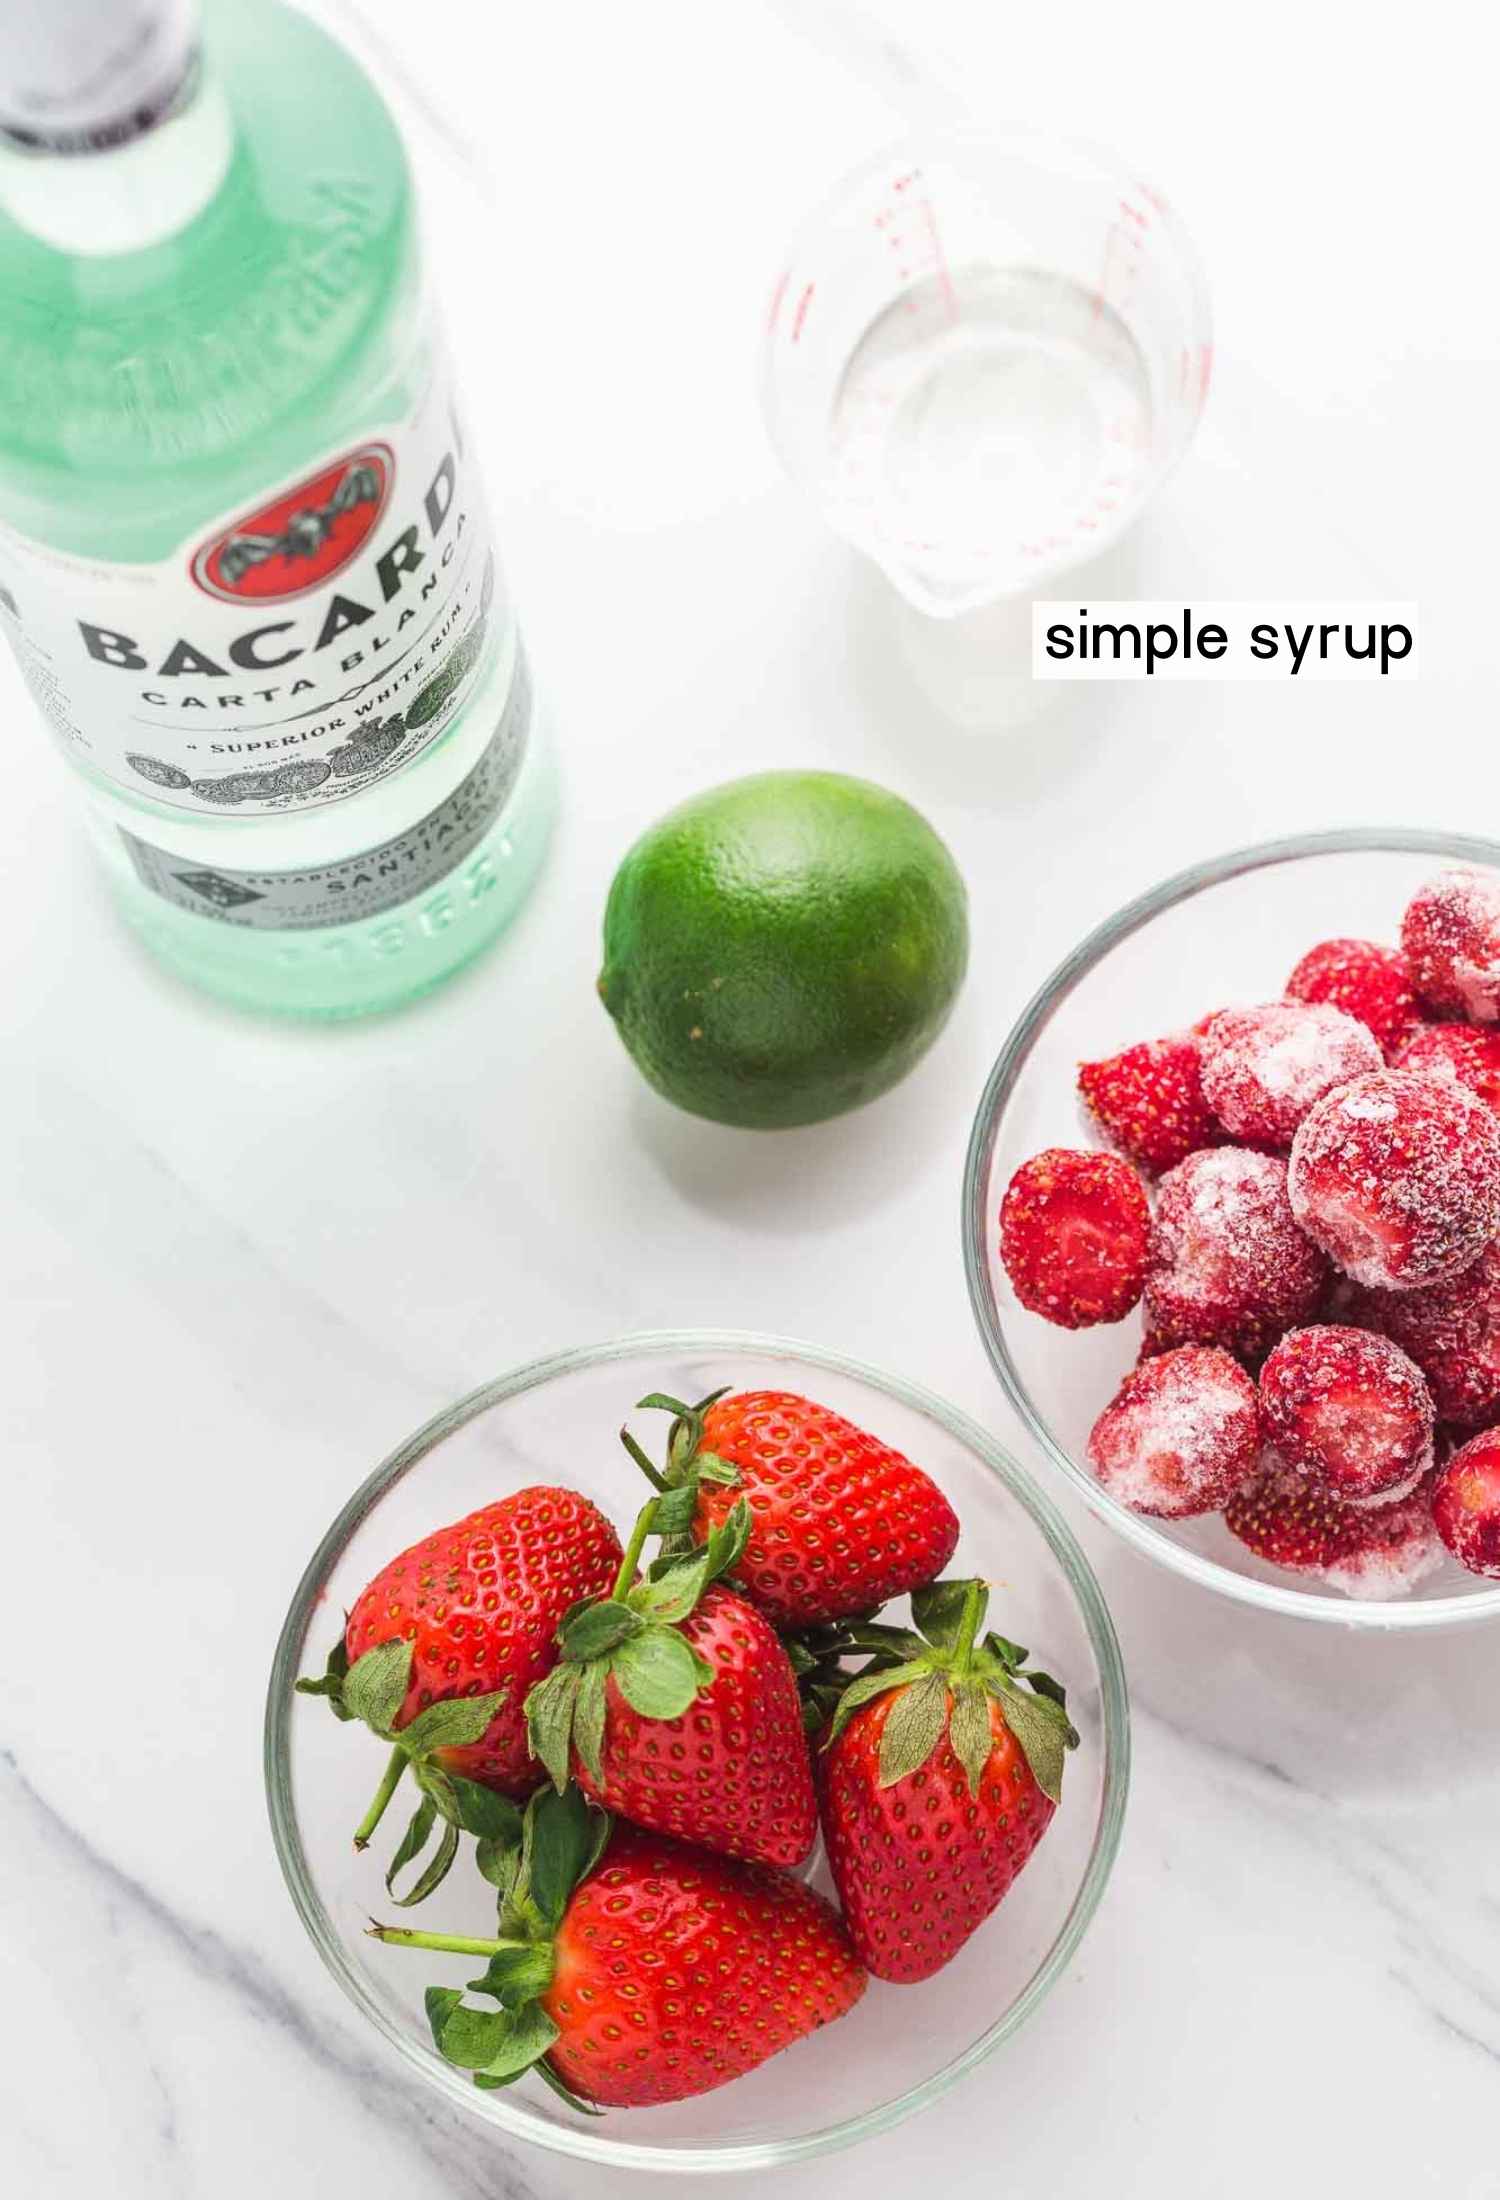 Ingredients needed to make strawberry daiquiri: strawberries (Fresh and frozen), rum, lime, simple syrup.